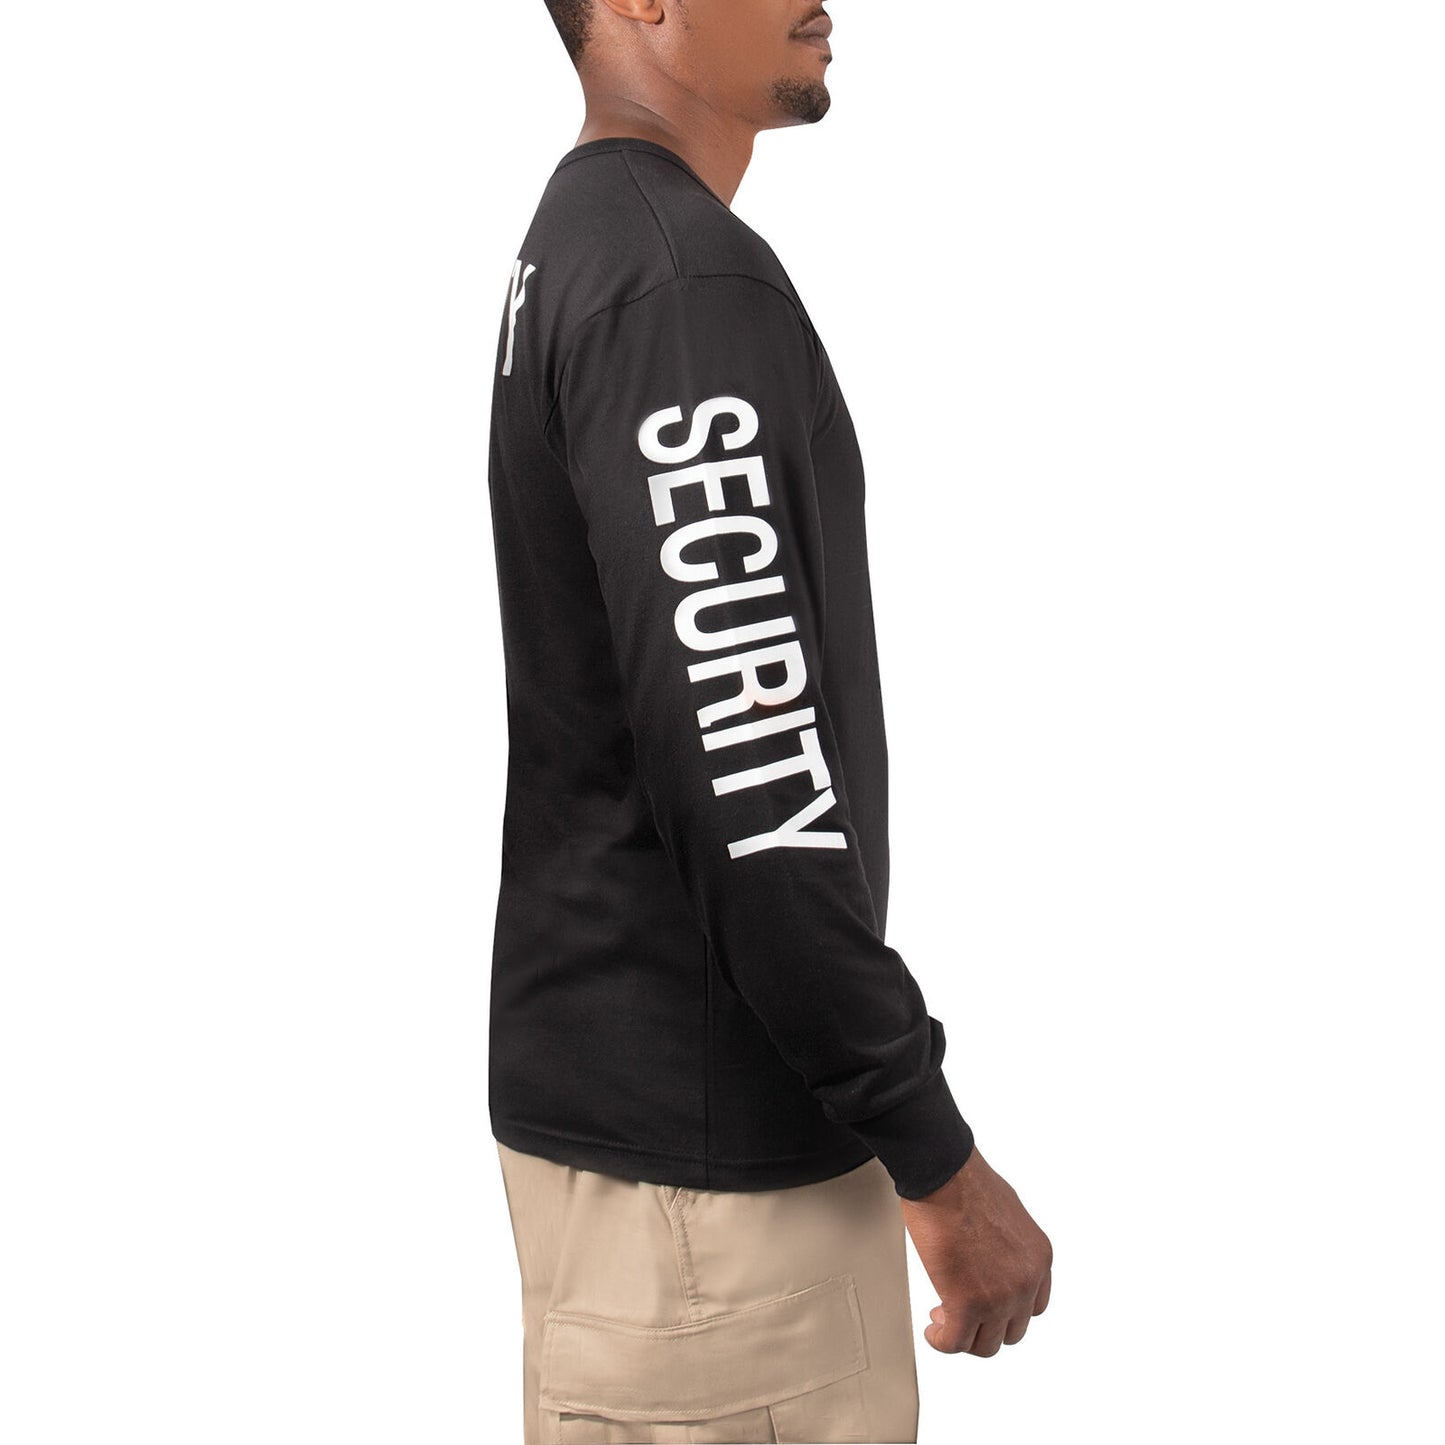 Men's Long Sleeve Two-Sided SECURITY T-Shirt in Black